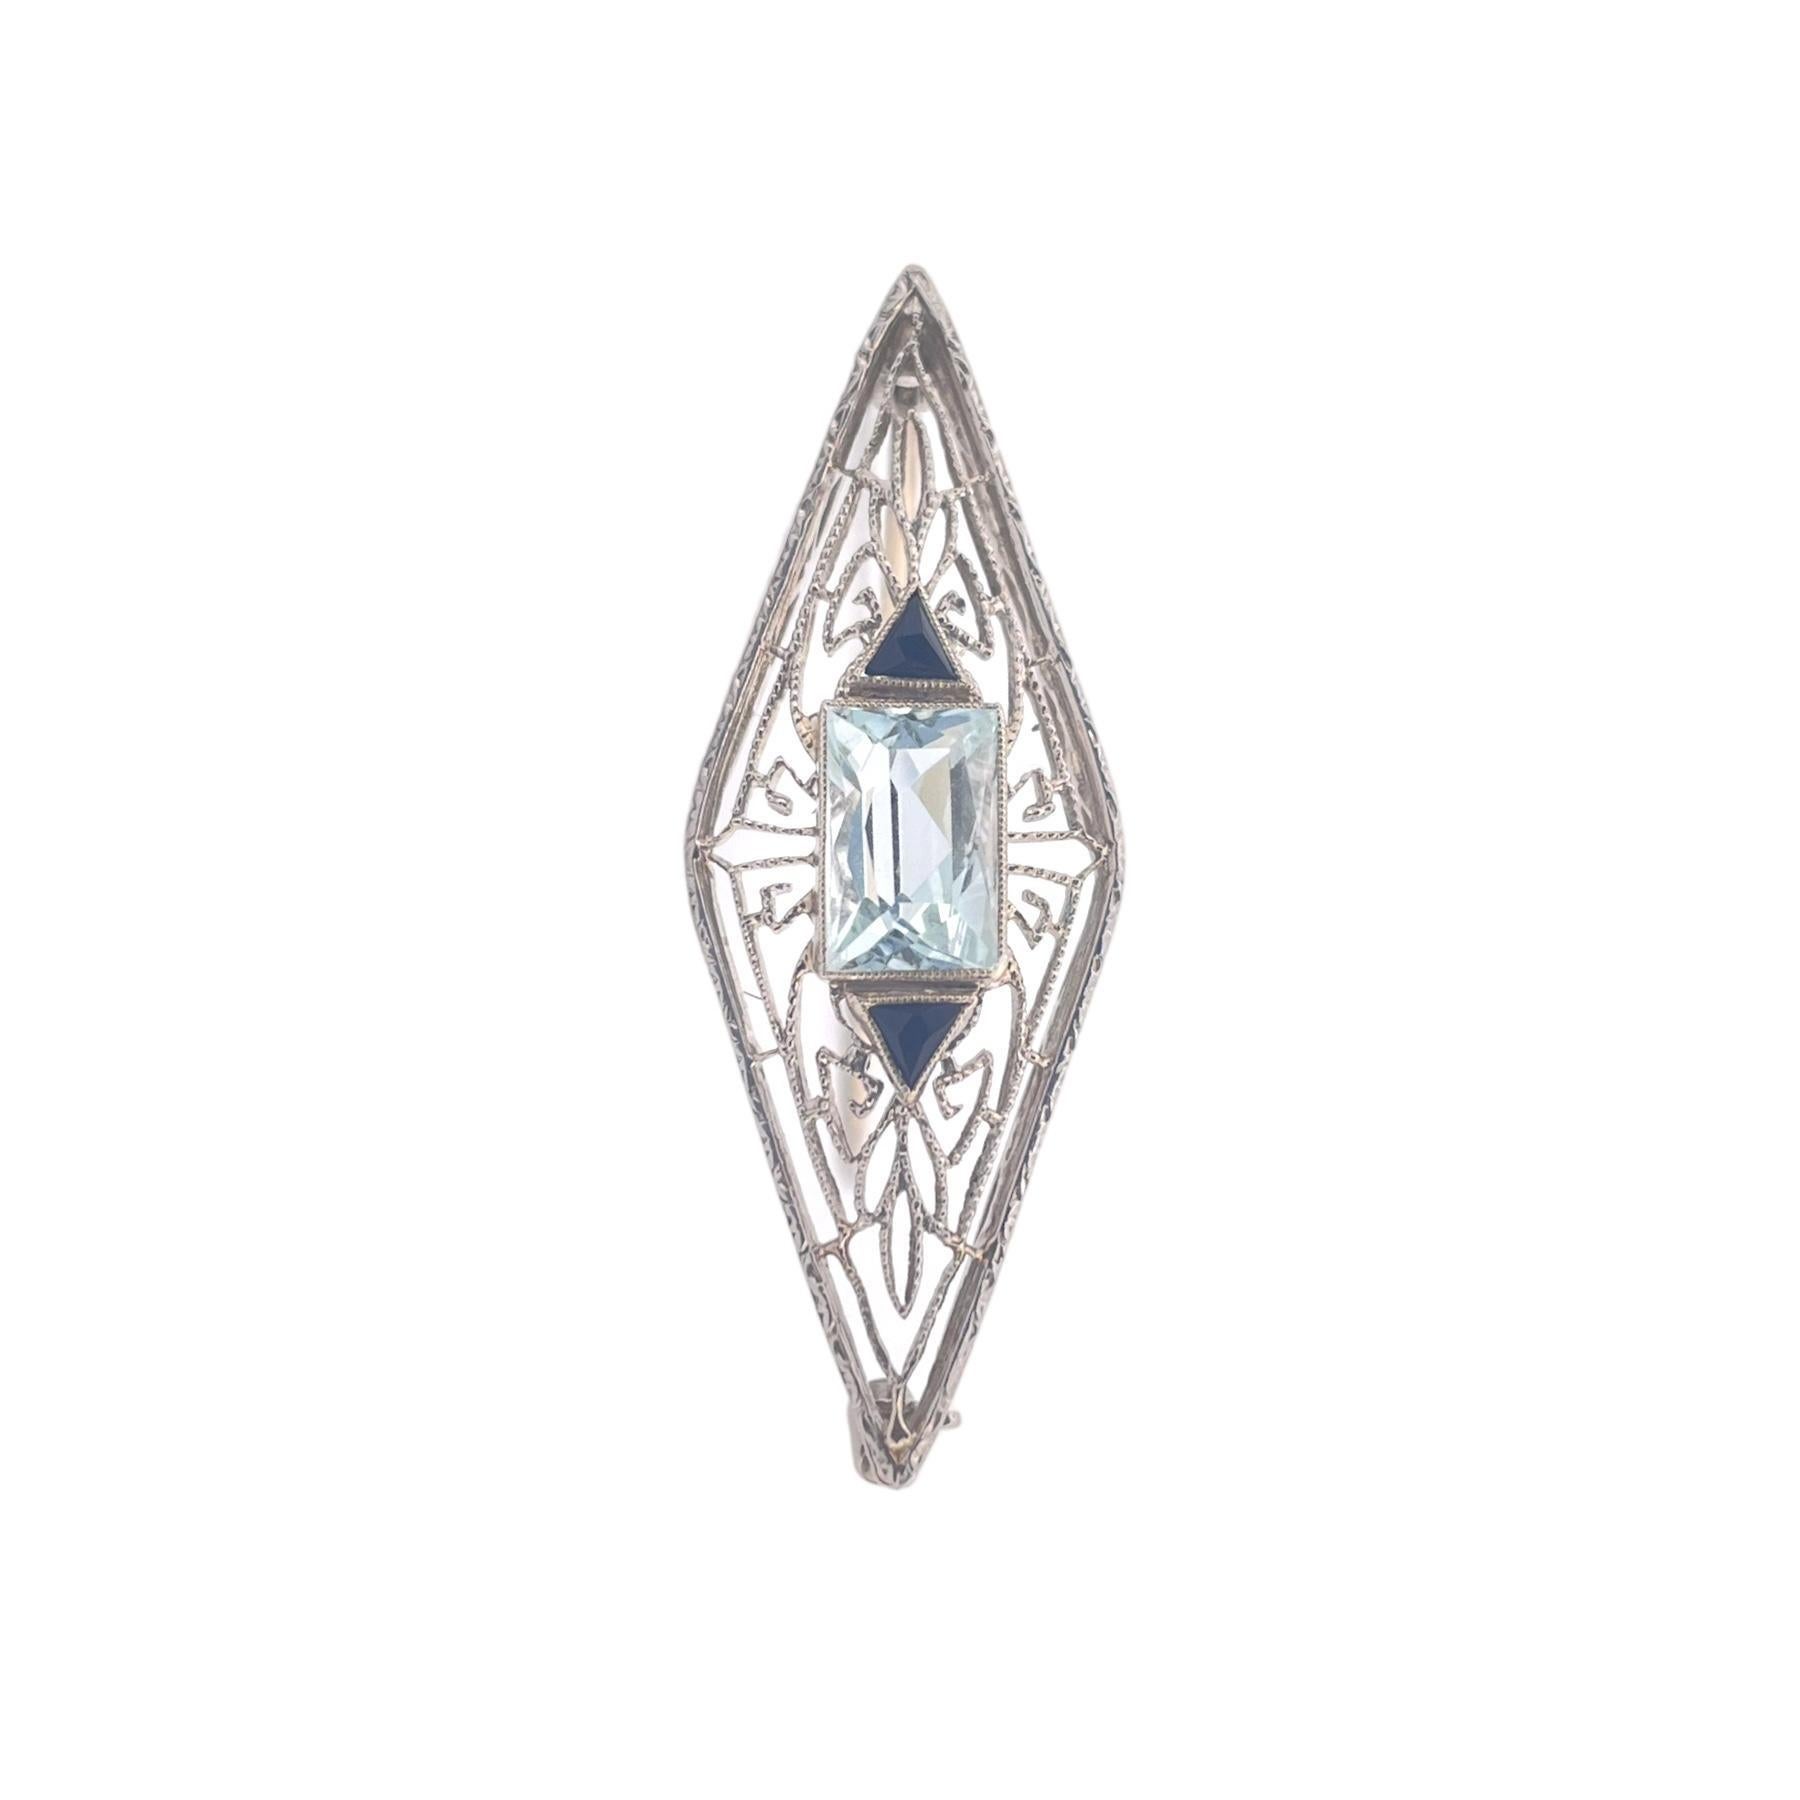 Elevate your jewelry collection with this exquisite Art Deco Aqua and Onyx Brooch, a vintage masterpiece that captures the essence of the Art Deco era. Crafted in lustrous 14K white gold and adorned with aqua and onyx gemstones, this brooch is a